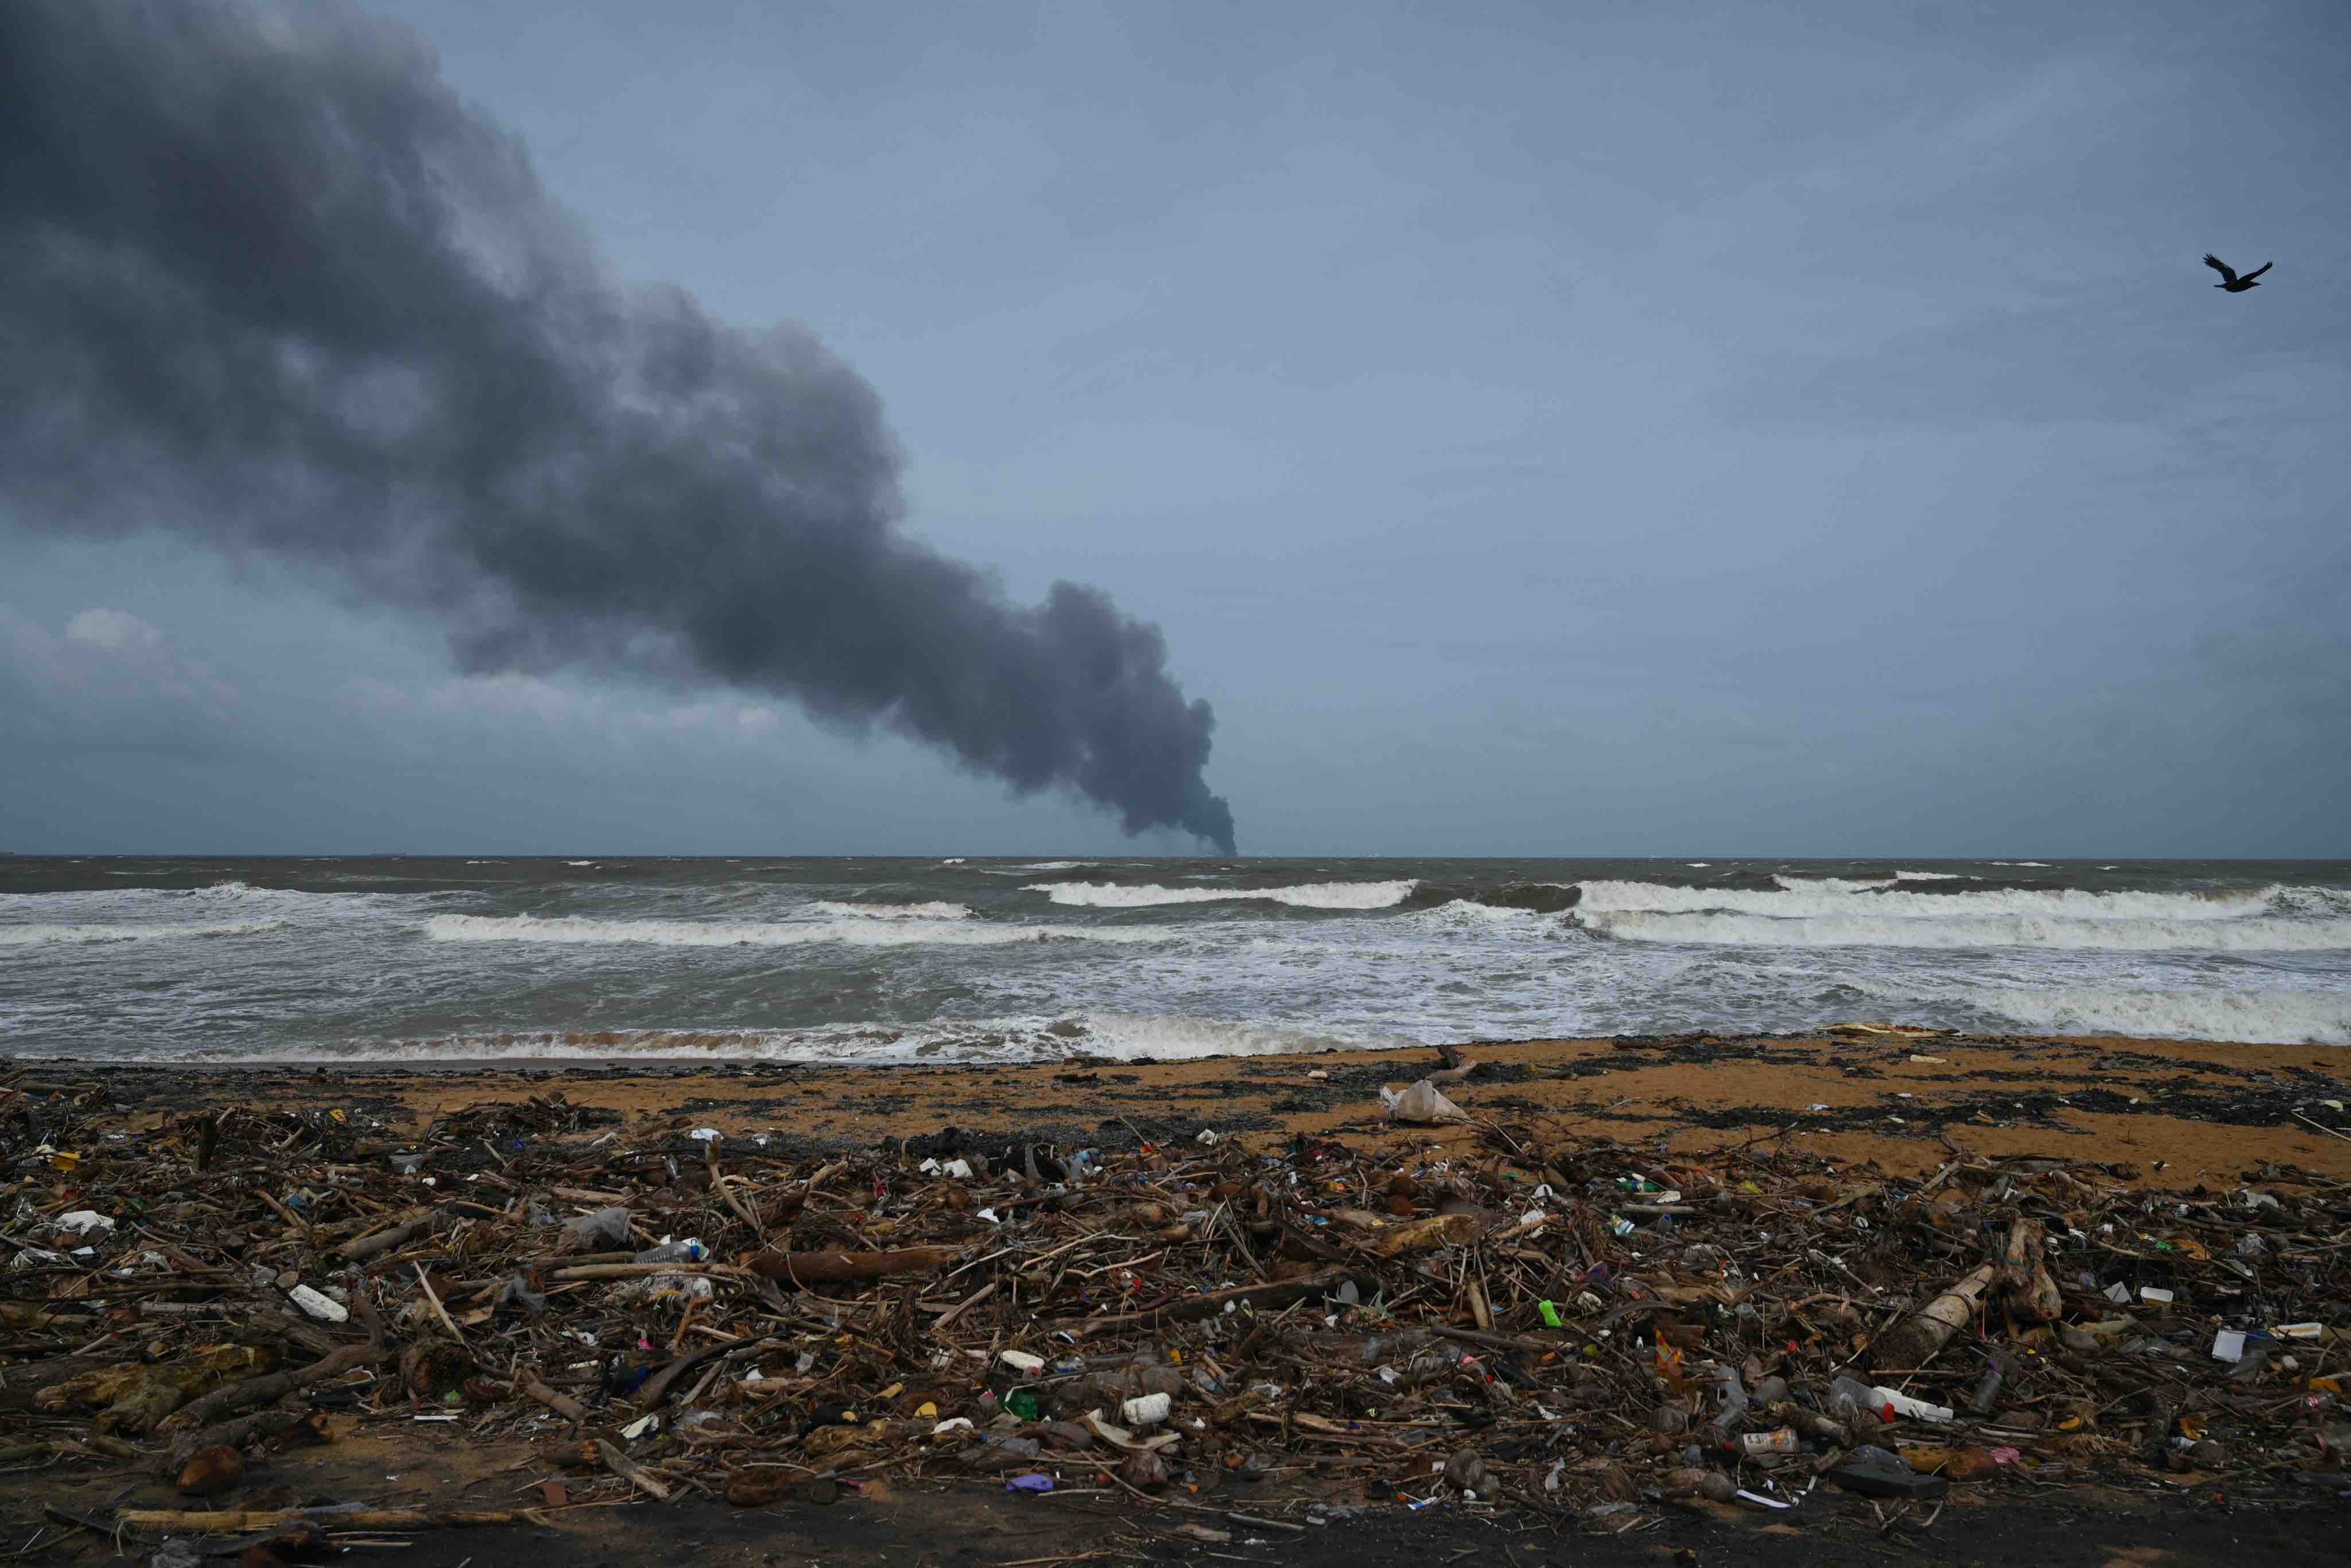 A Cargo Ship Has Been Burning For Days Off Sri Lanka’s Coast, Causing A Massive Environmental Disaster